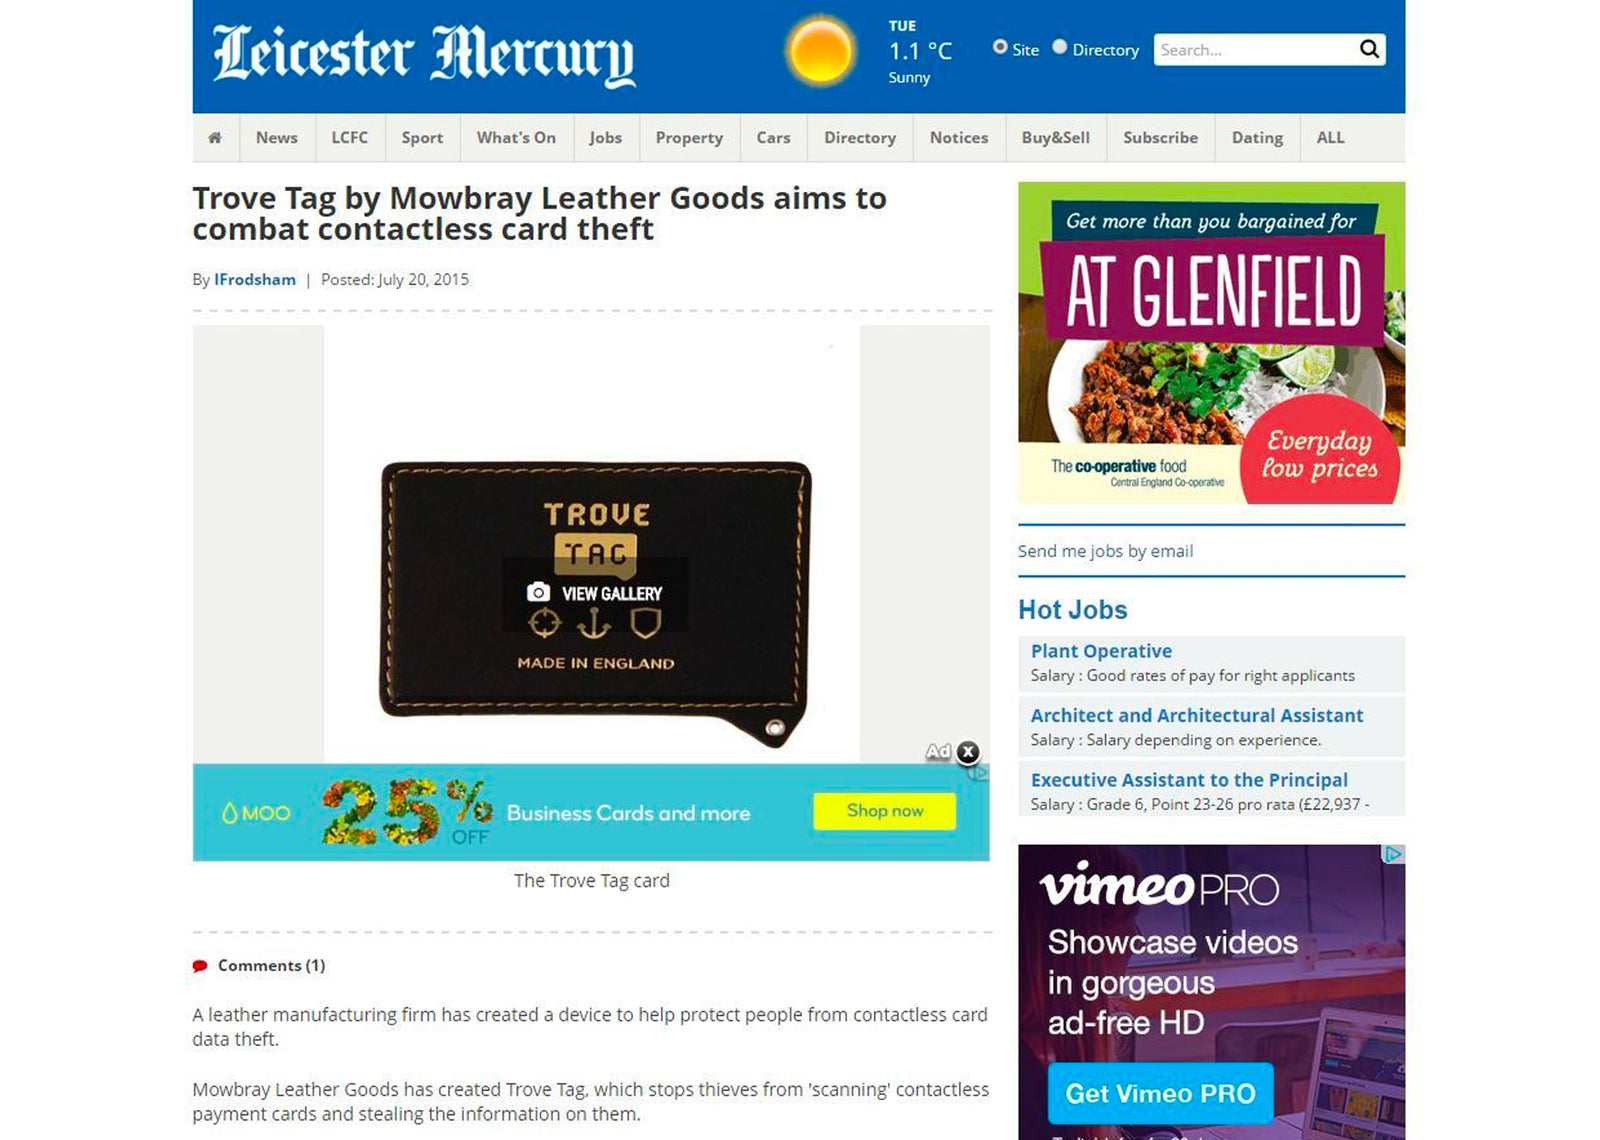 Review by Leicester Mercury